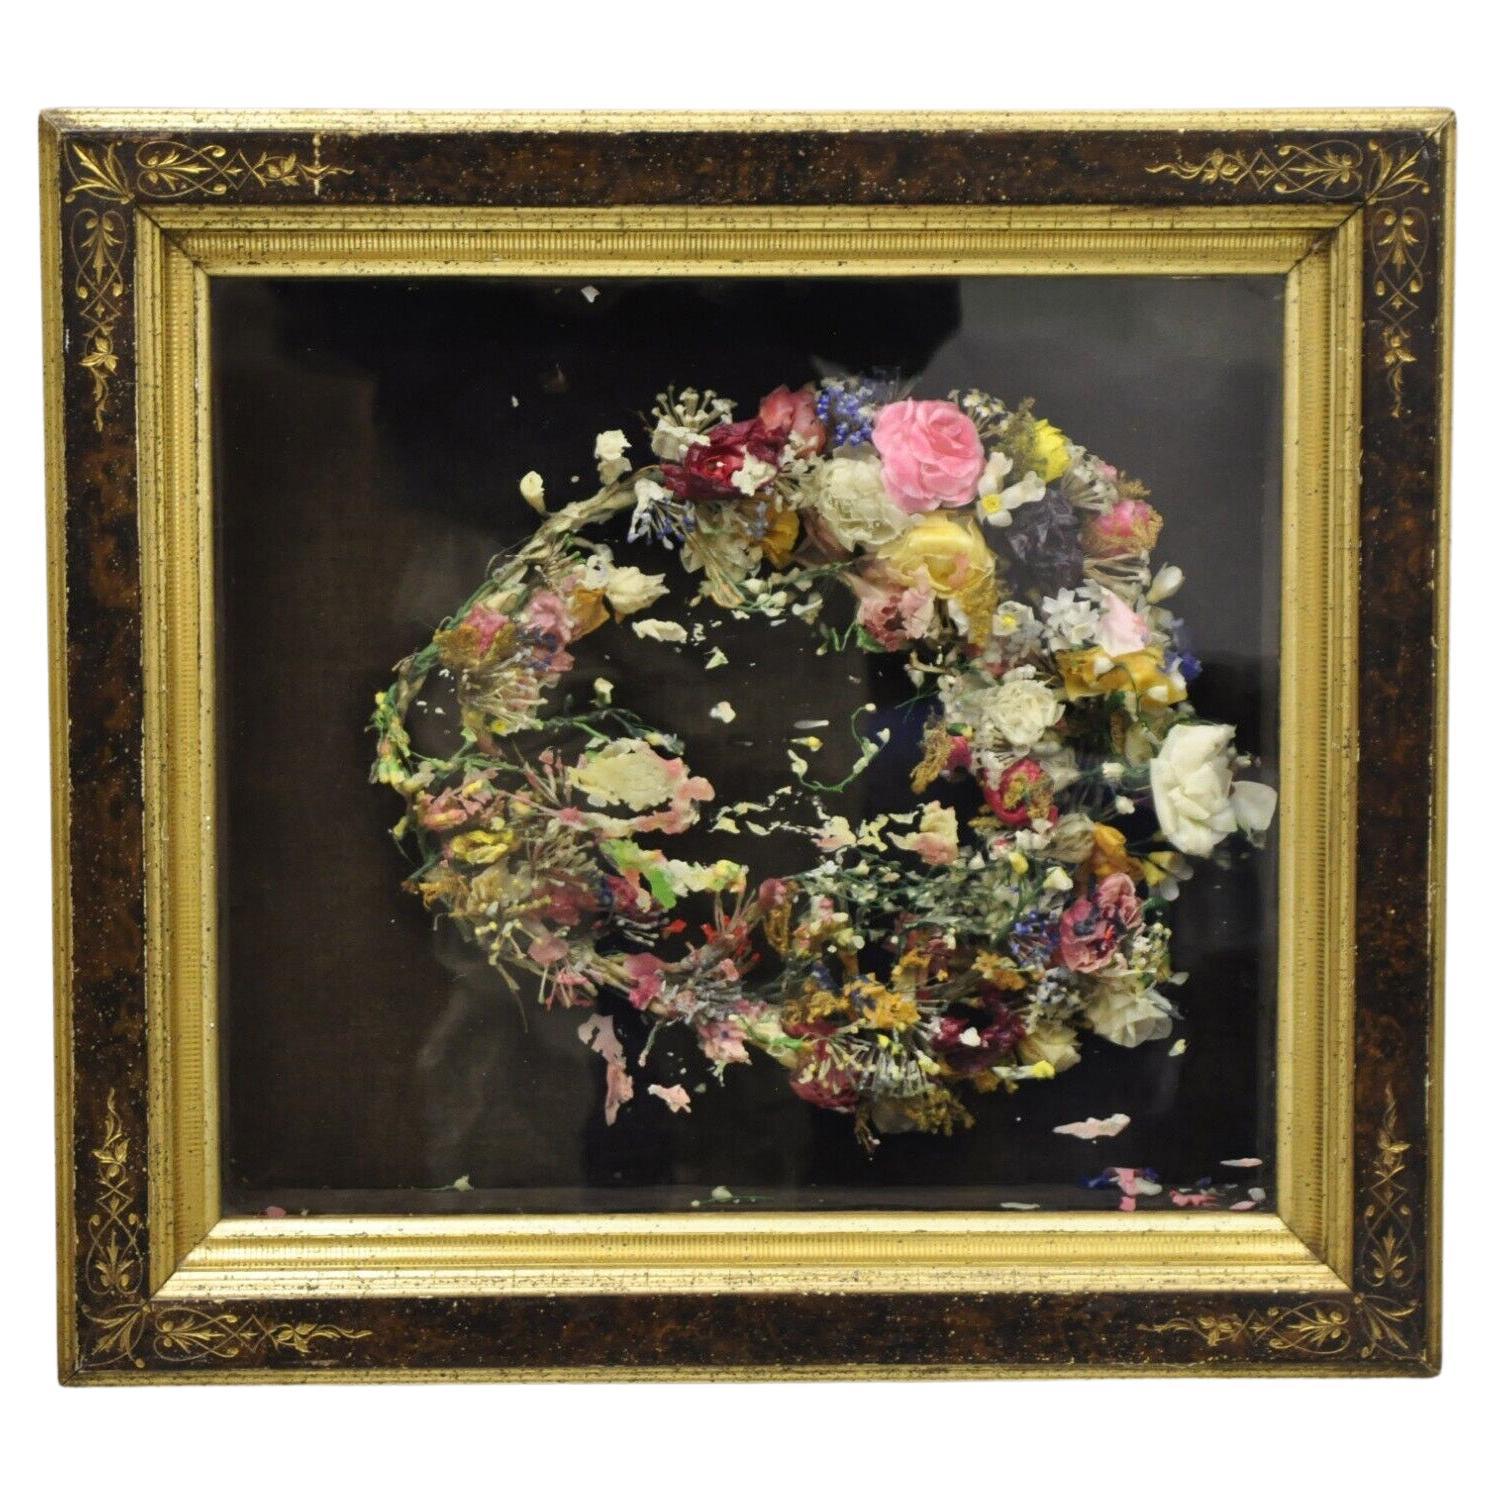 Antique Victorian Wax Flower Floral Mourning Wreath Shadow Box Frame Oddity For Sale